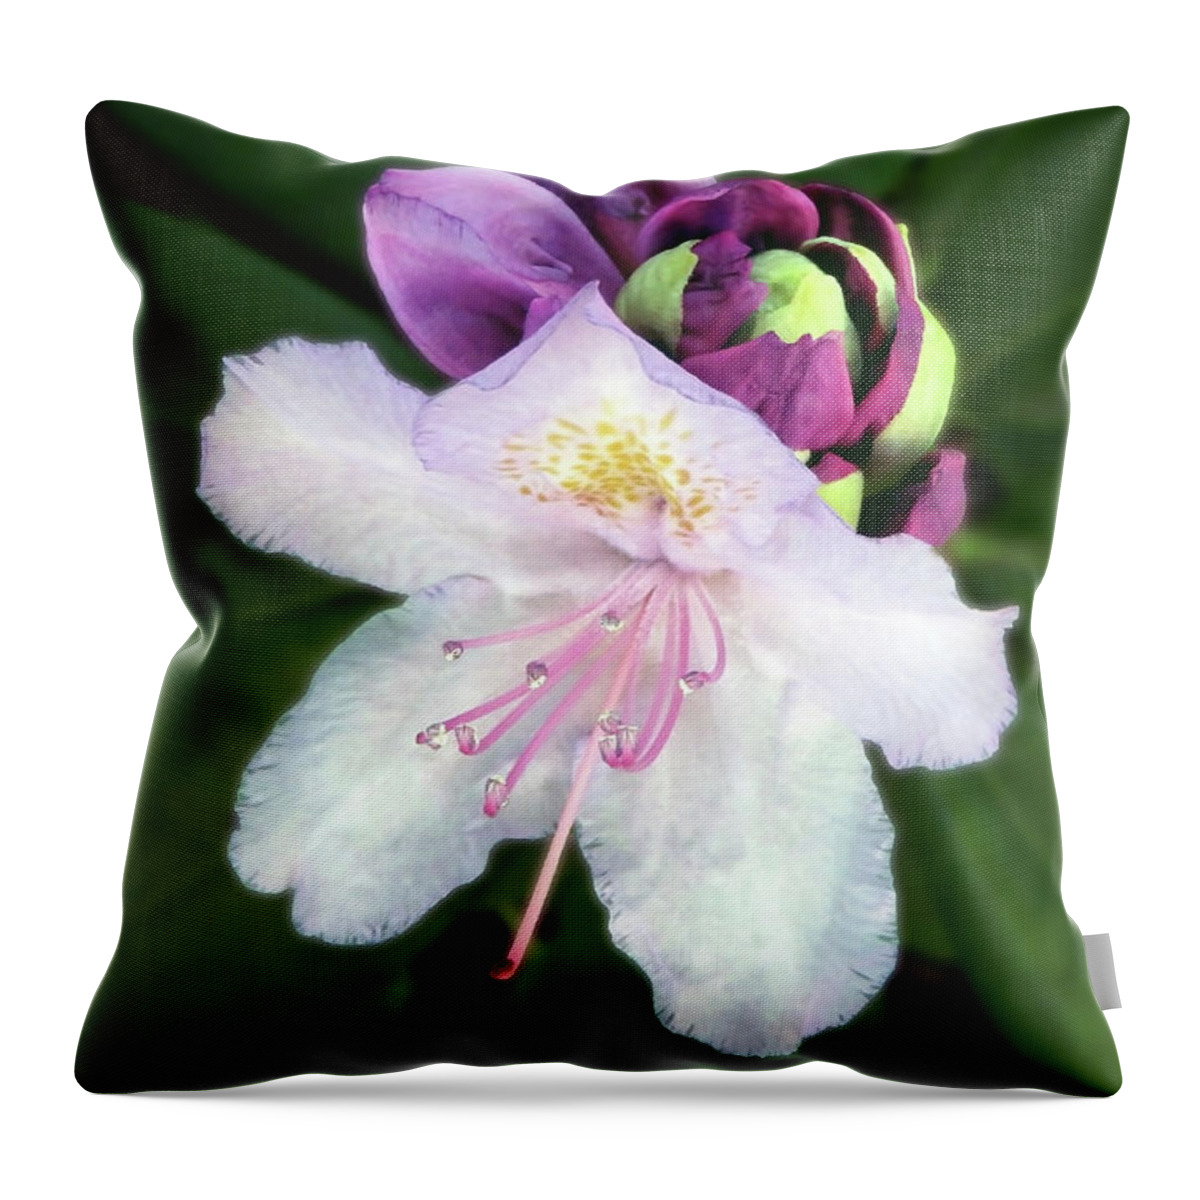 Flower Throw Pillow featuring the photograph White And Purple Rhododendron Closeup by Johanna Hurmerinta